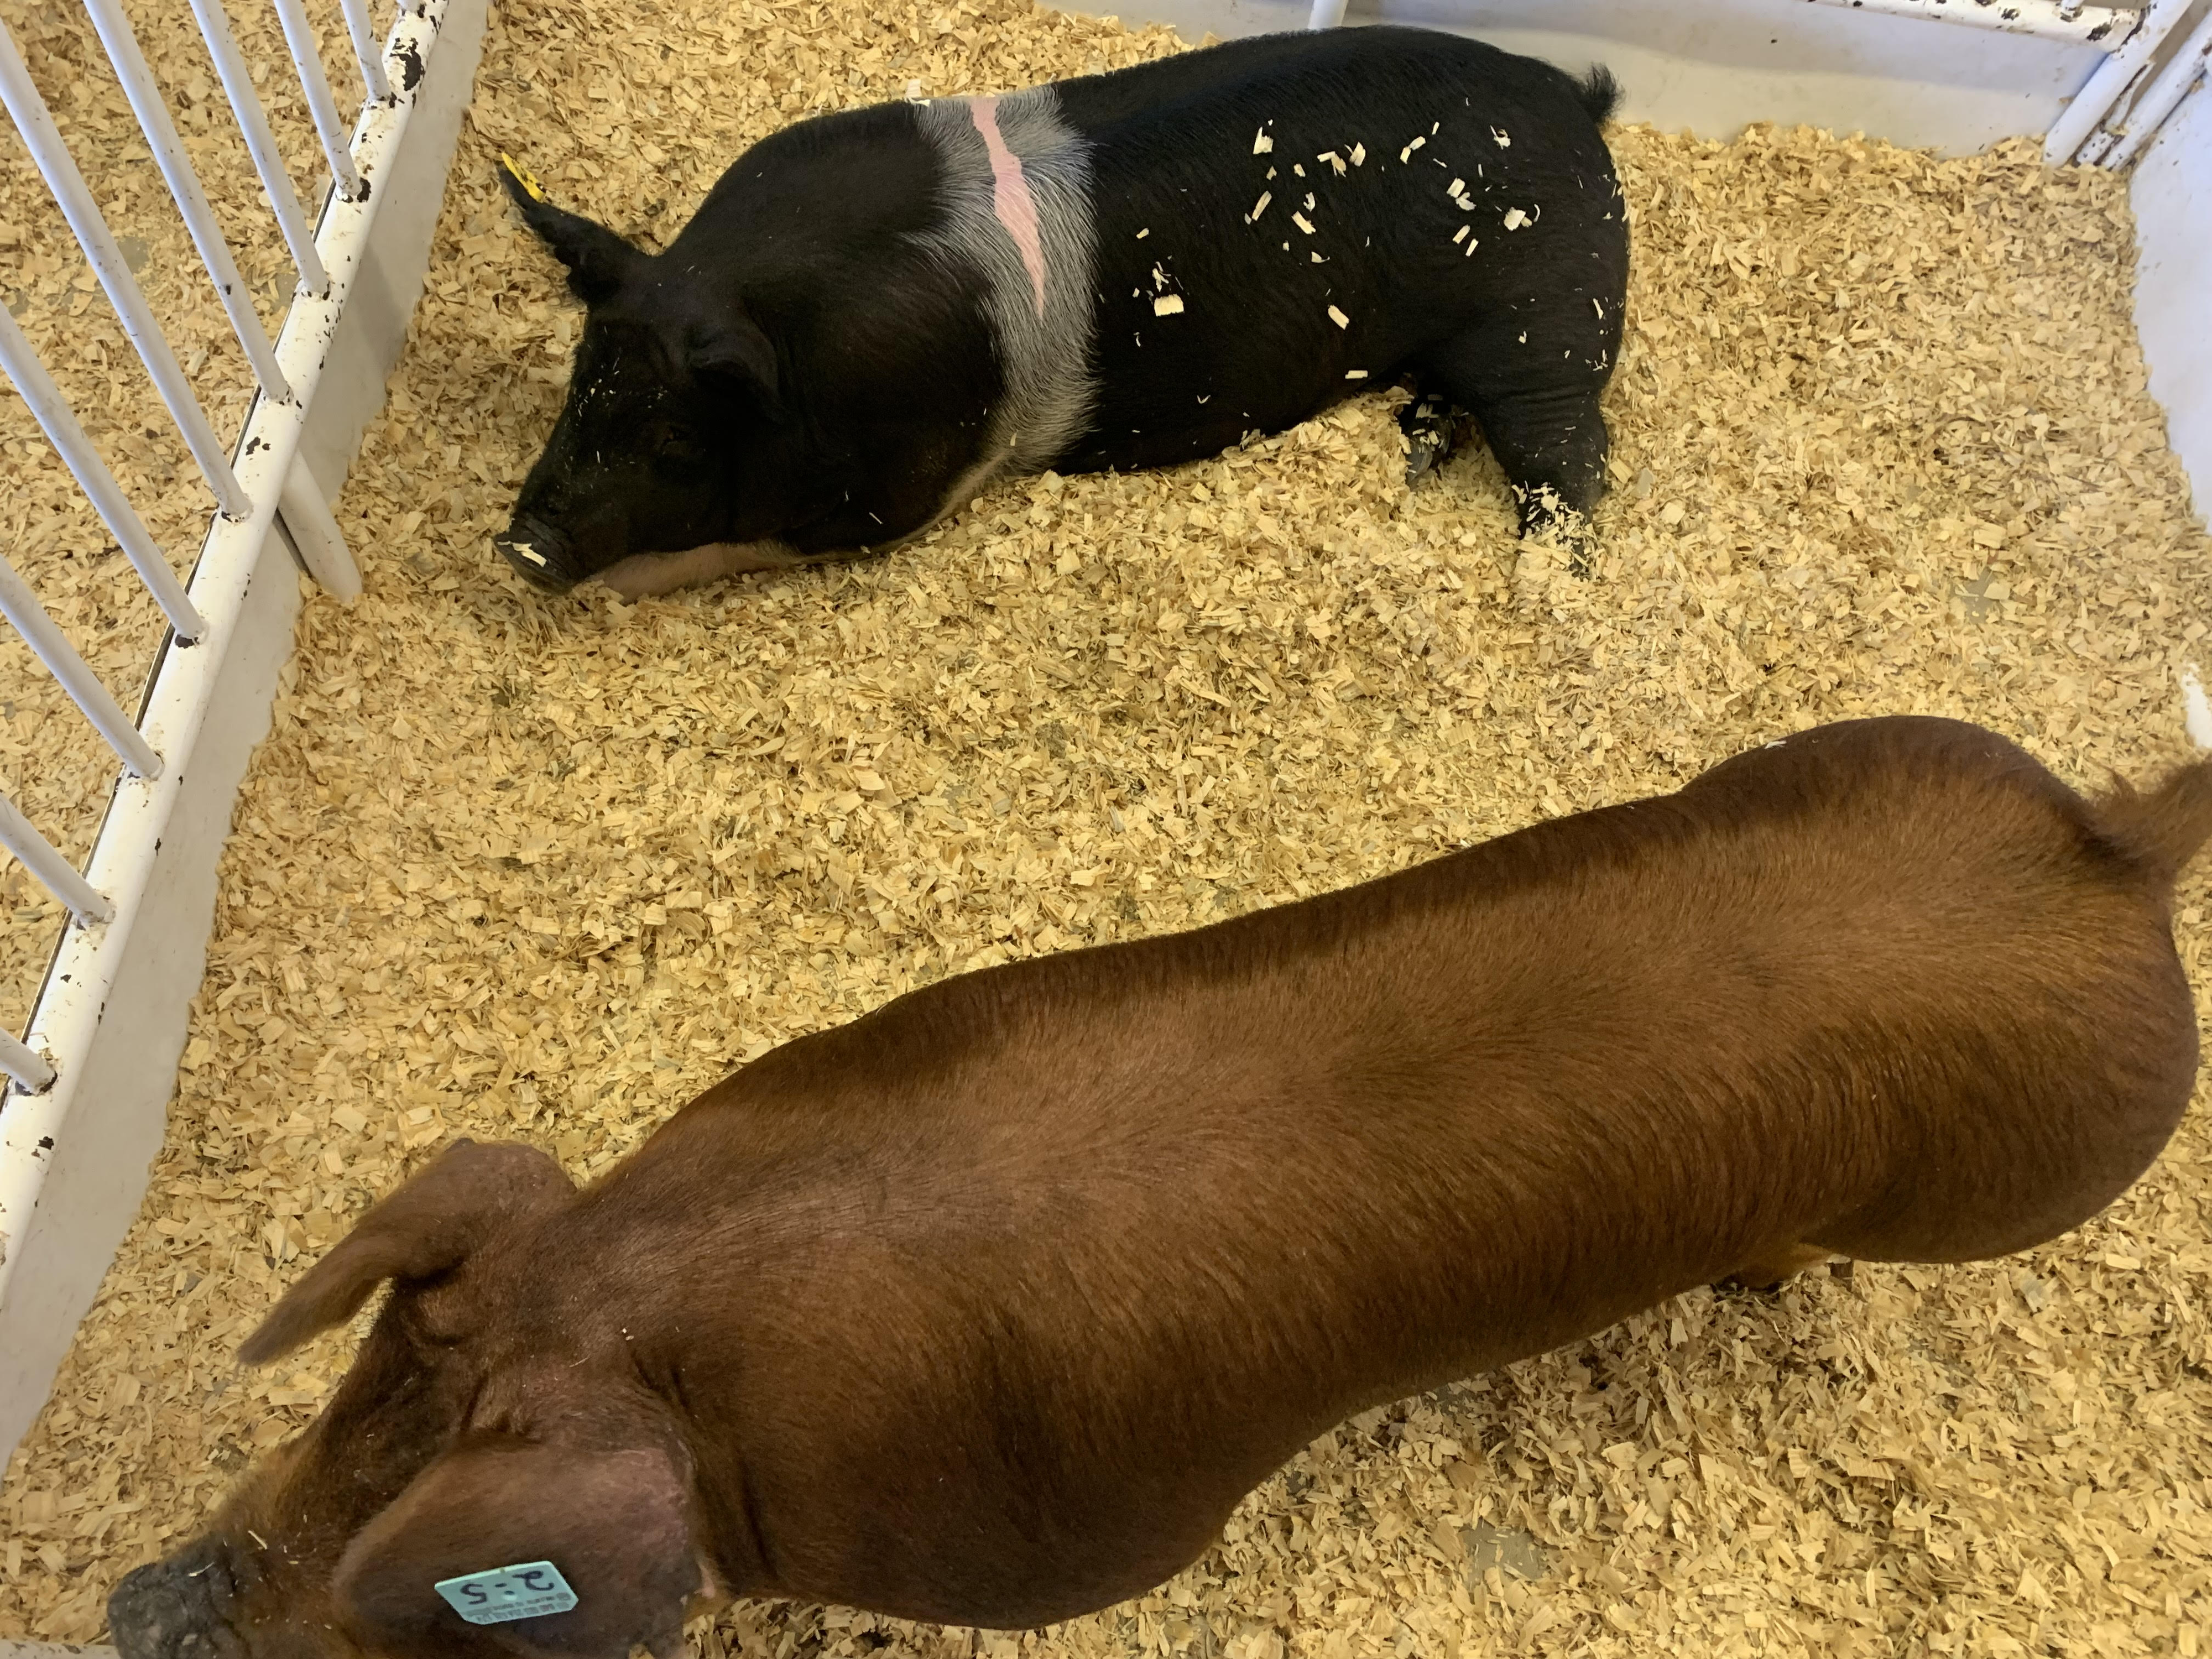 Morning Ag News, January 20, 2022: National Pork Board staff explains changes to Common Swine Industry Audit